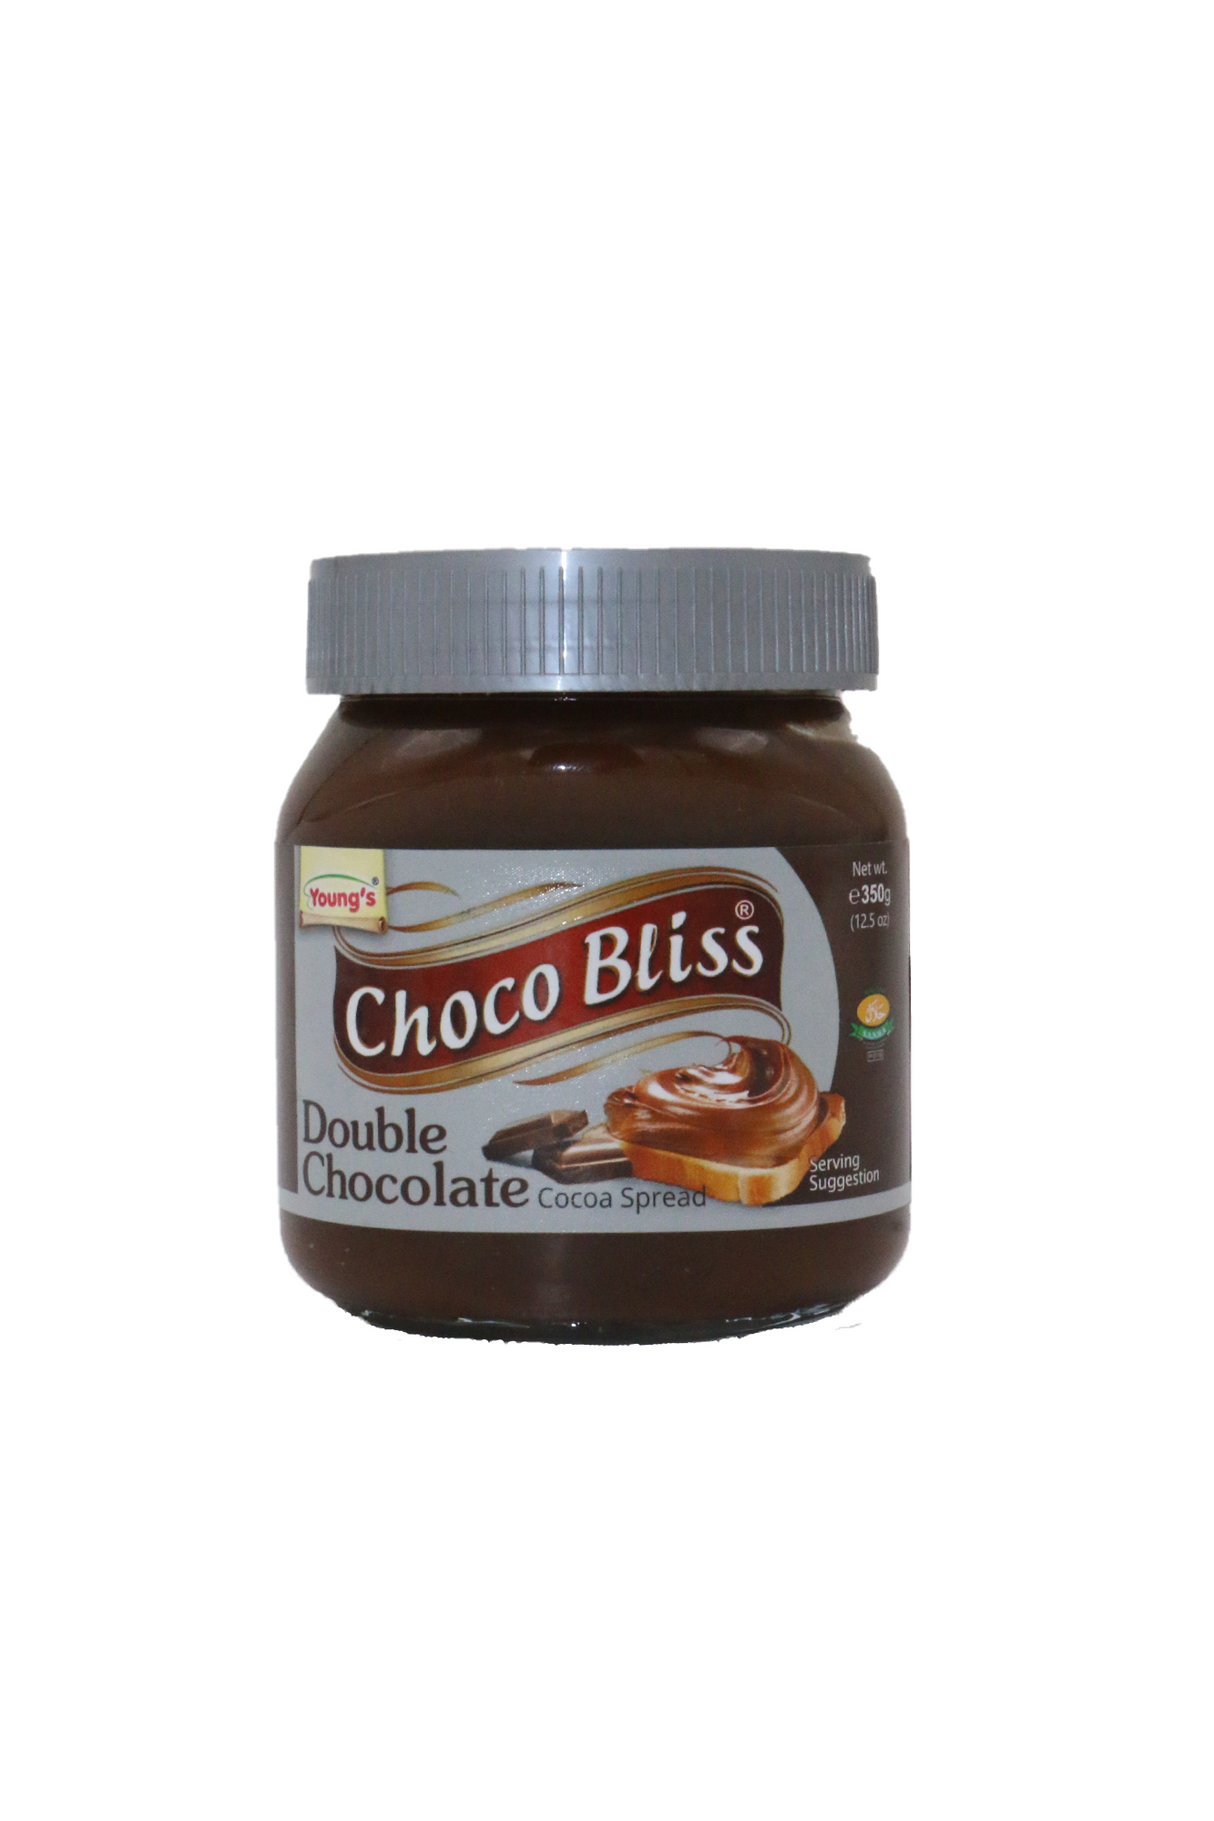 youngs spread choco bliss double chocolate 350g